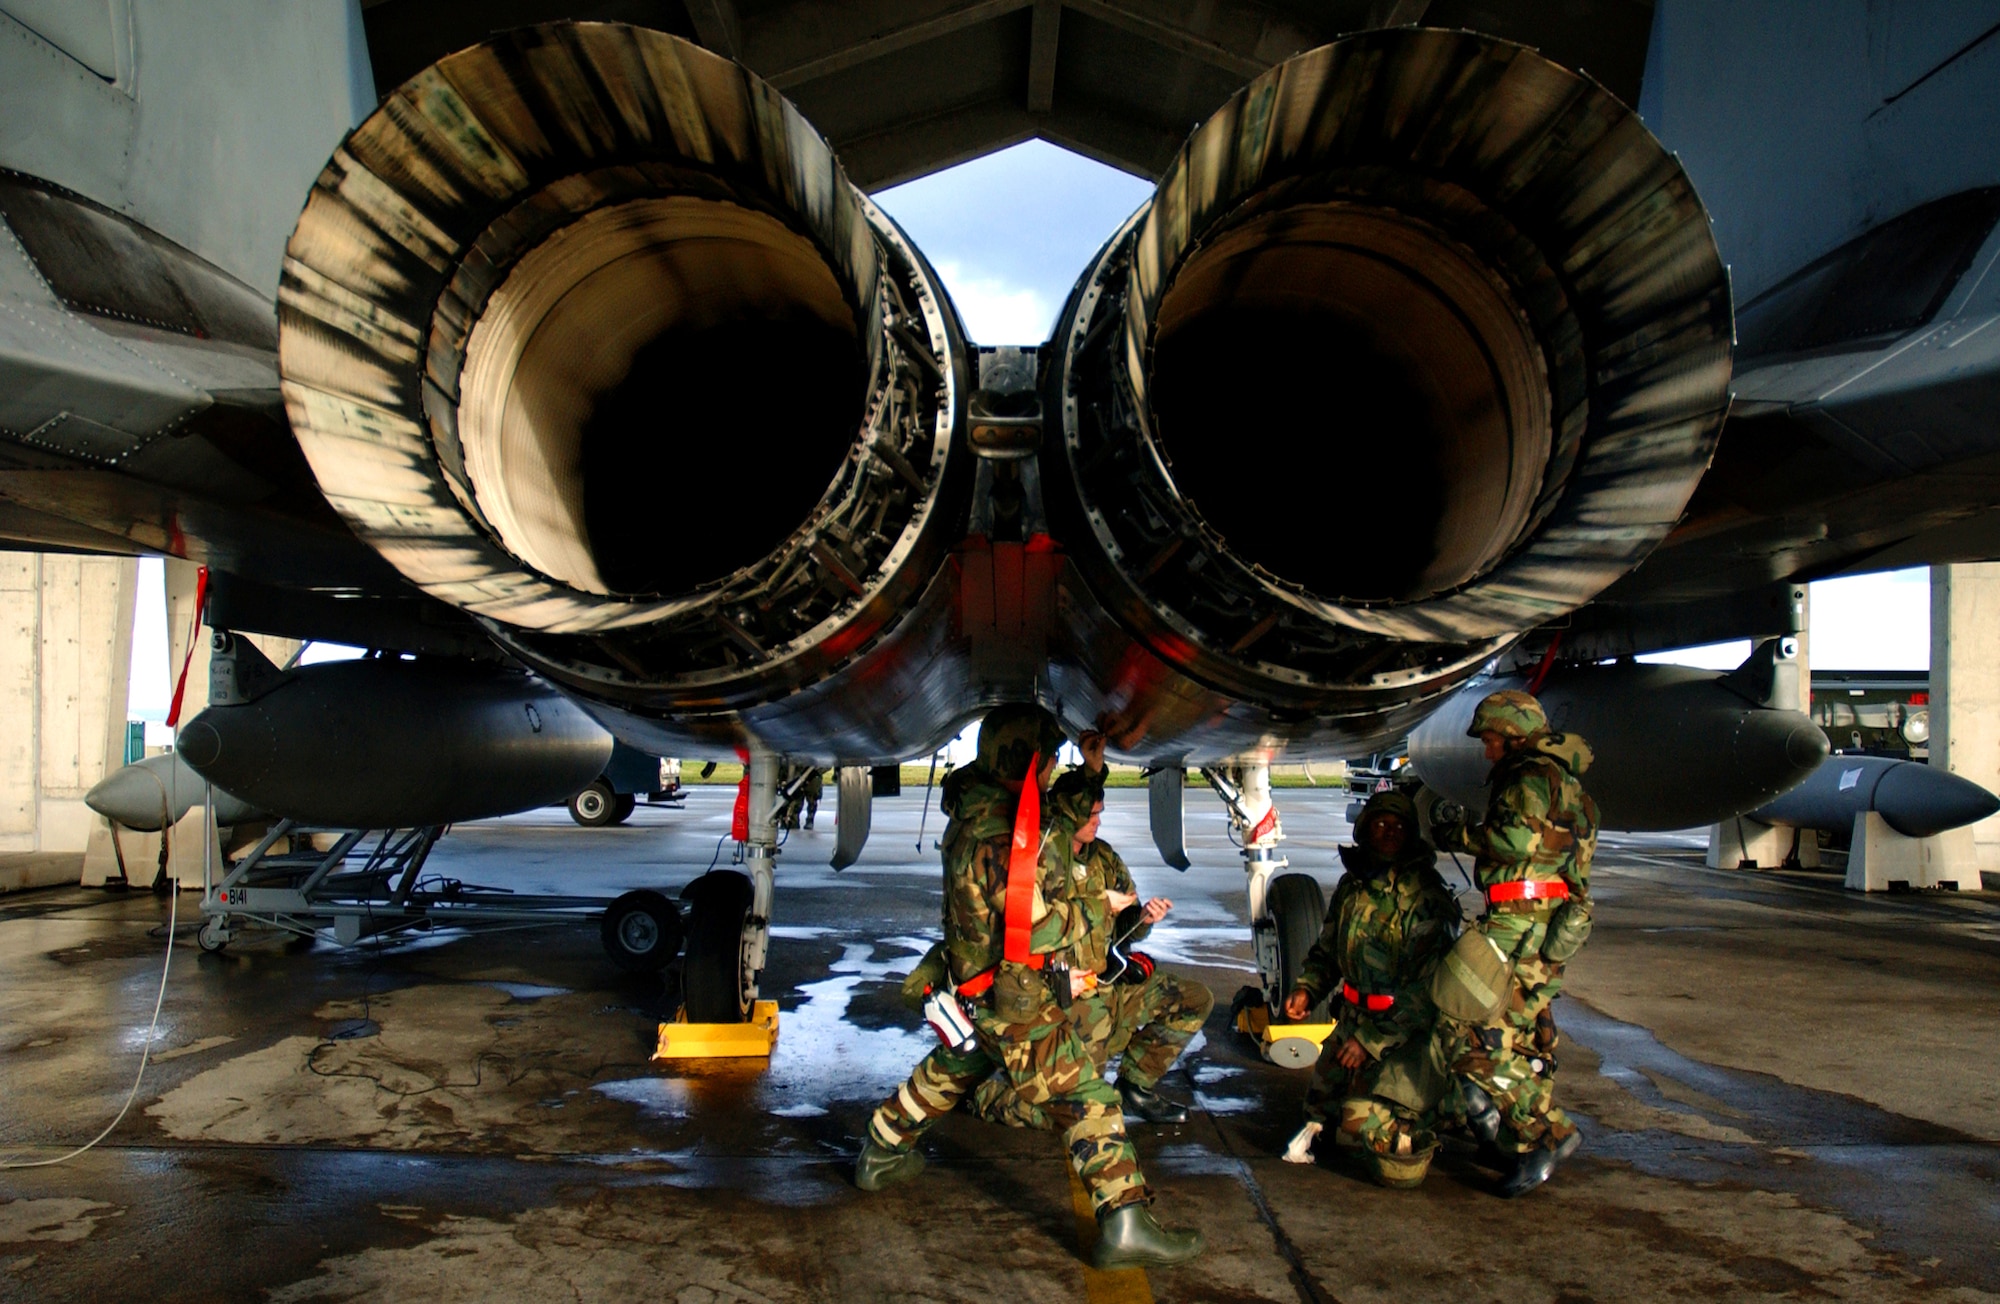 Airmen from the 18th Aircraft Maintenance Squadron perform final checks for fuel leaks after an engine swap during local operational readiness exercise Beverly High 08-4 at Kadena Air Base, Japan, Feb. 14, 2008. The 18th Wing conducted the exercise from Feb. 10 to 15 to test Airmen's ability to respond in contingency situations. 
(U.S. Air Force photo/Senior Airman Jerermy McGuffin) 